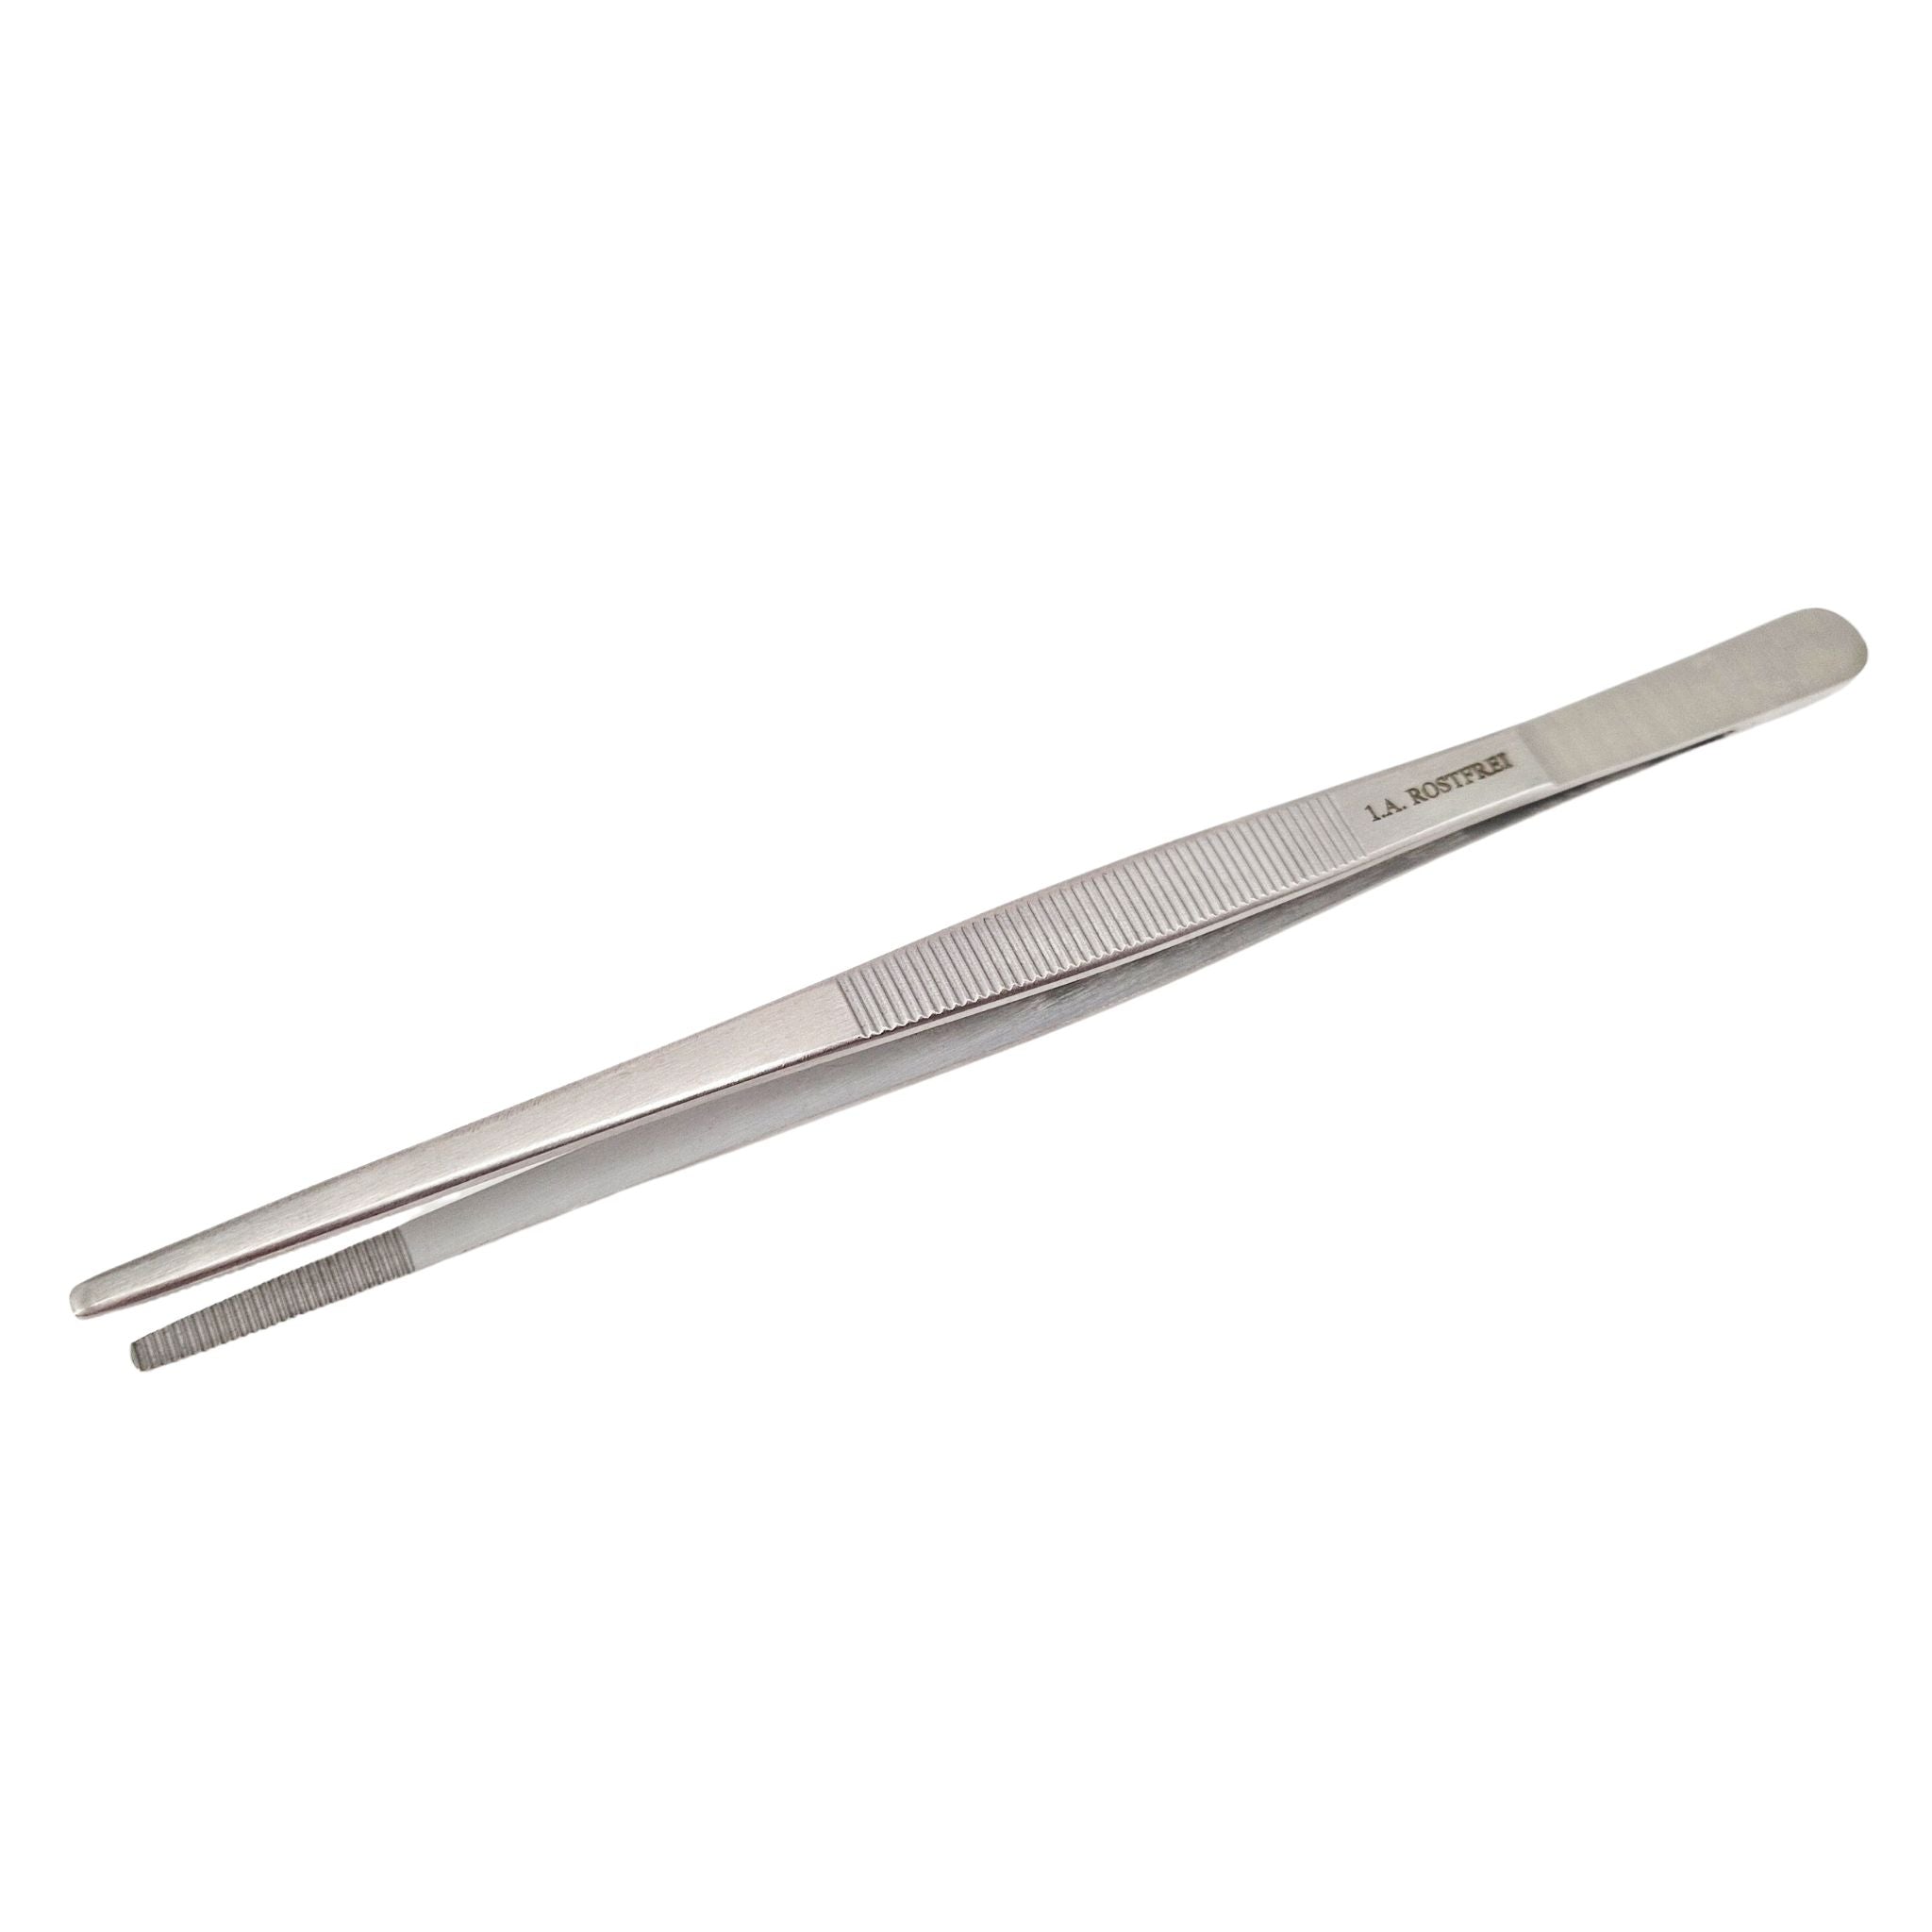 Lavabis dissecting forceps blunt stainless steel